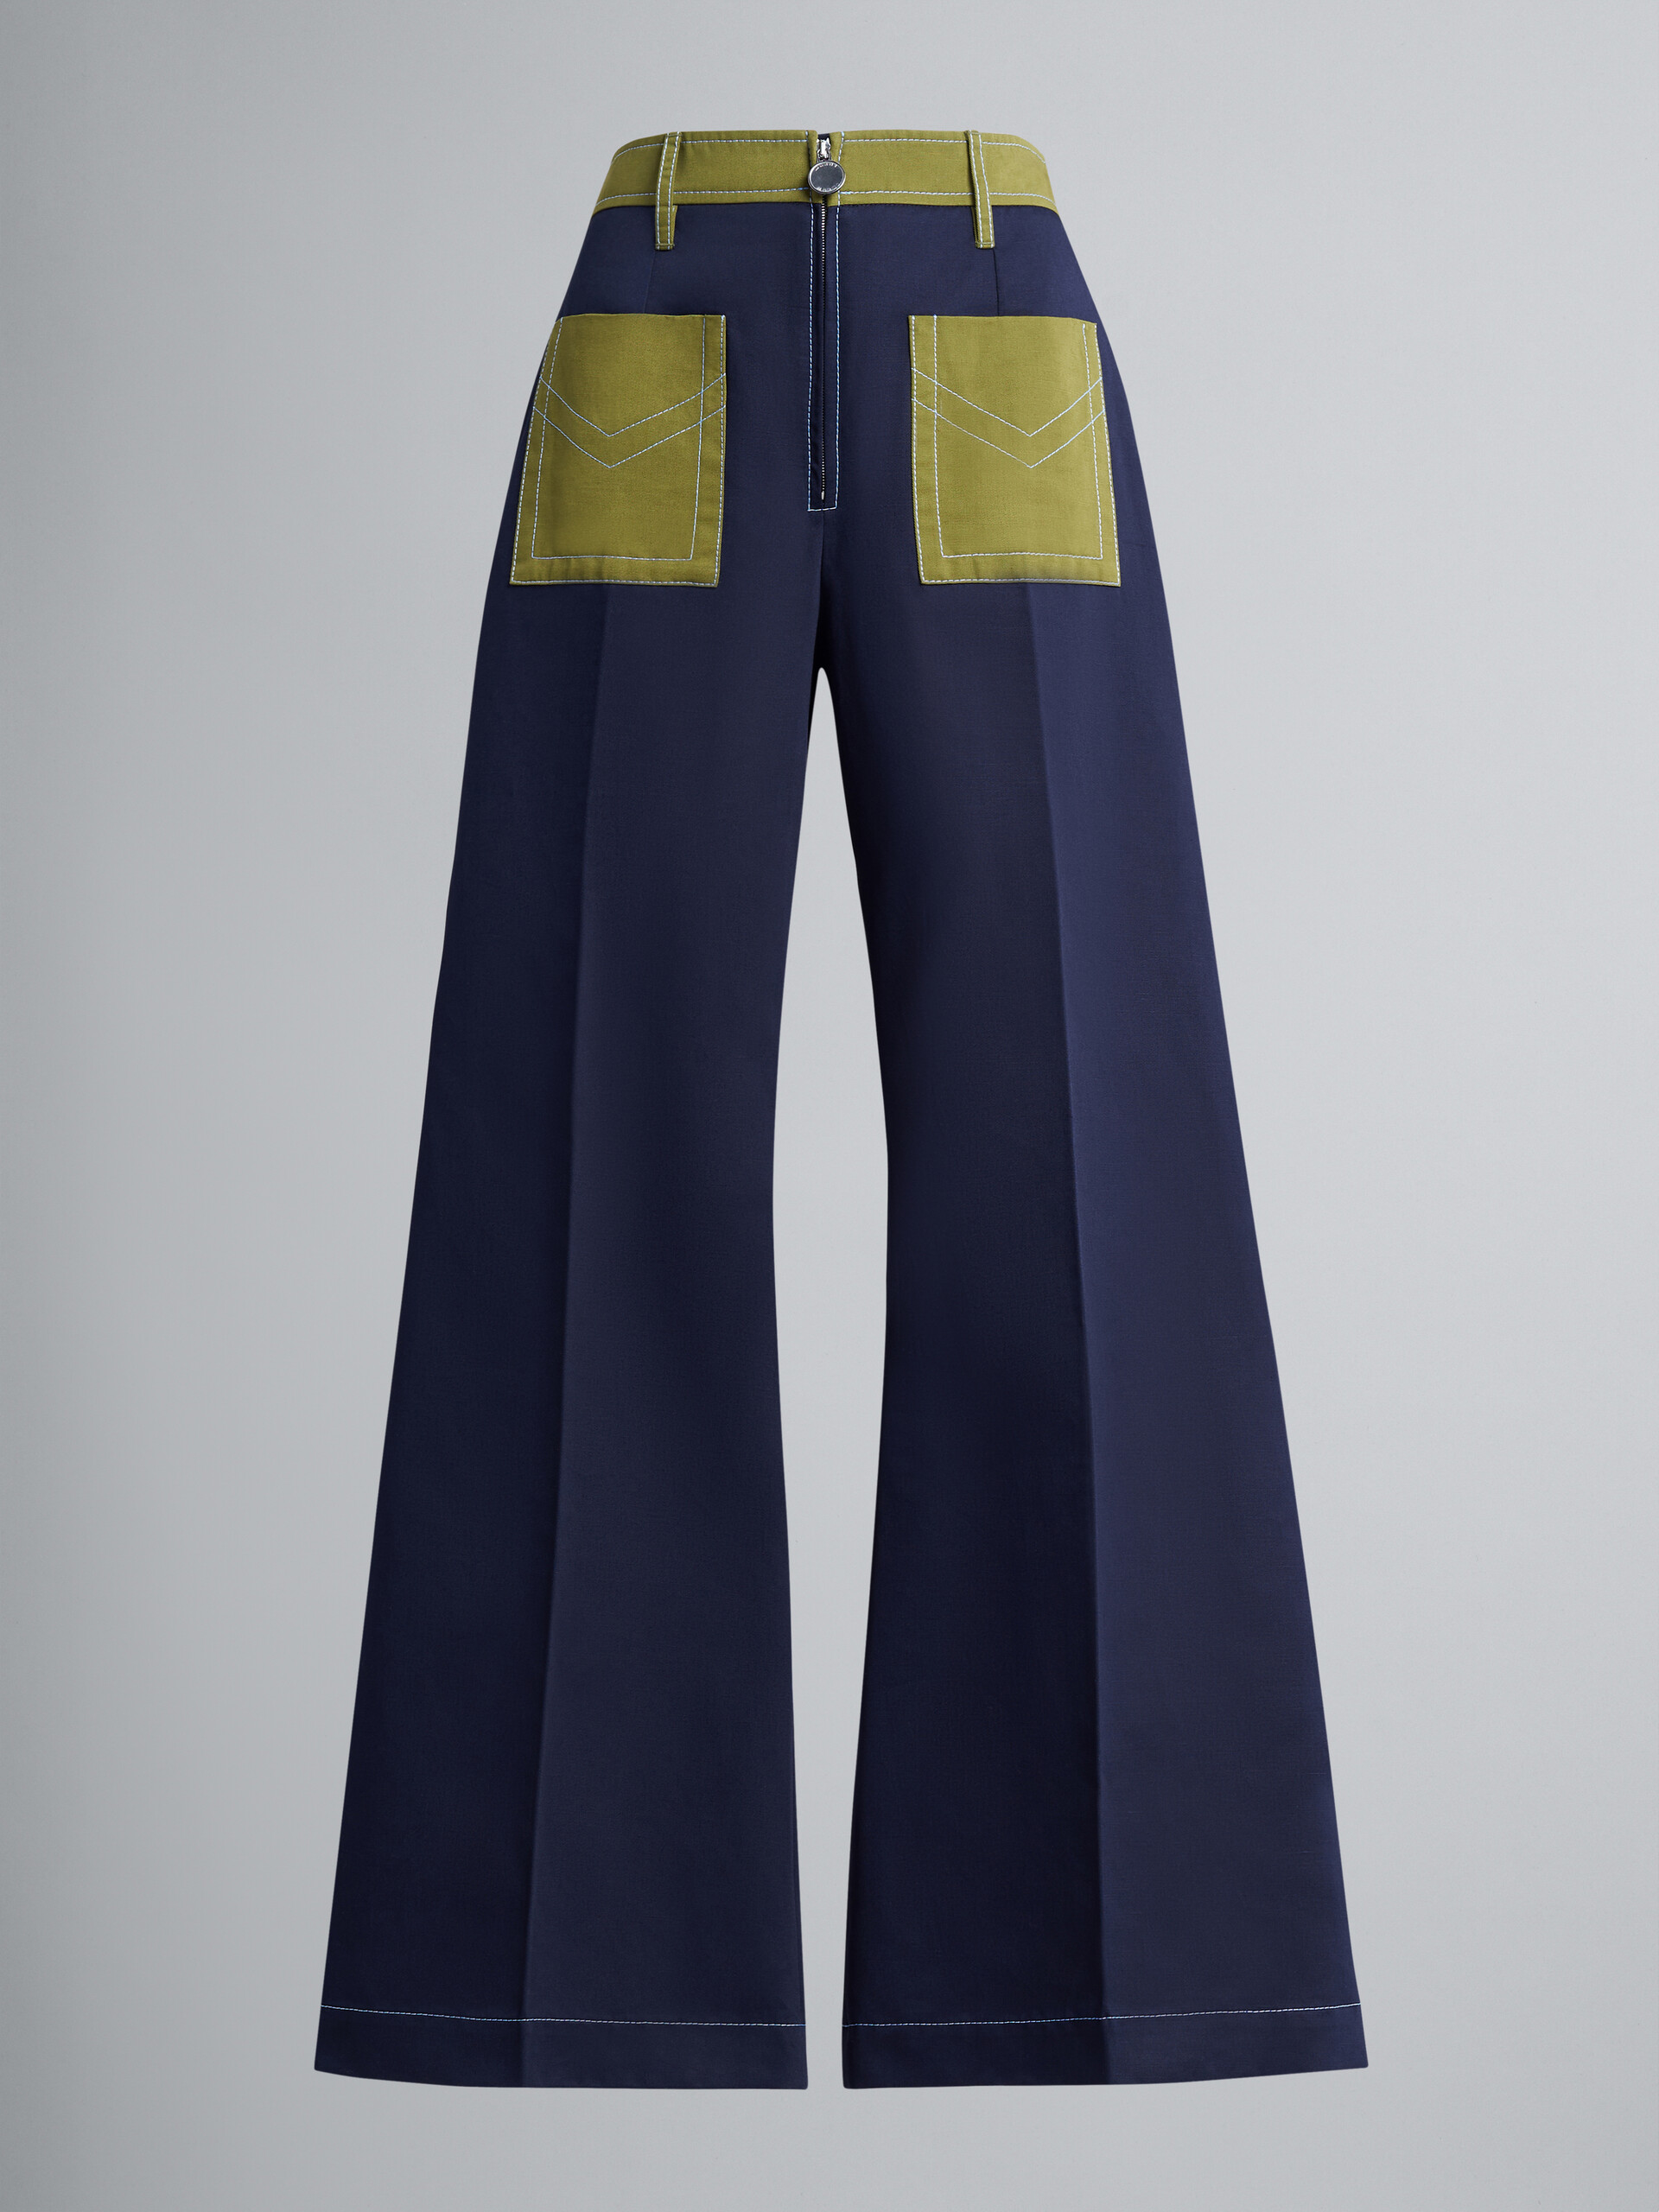 Cotton drill trousers - Pants - Image 1